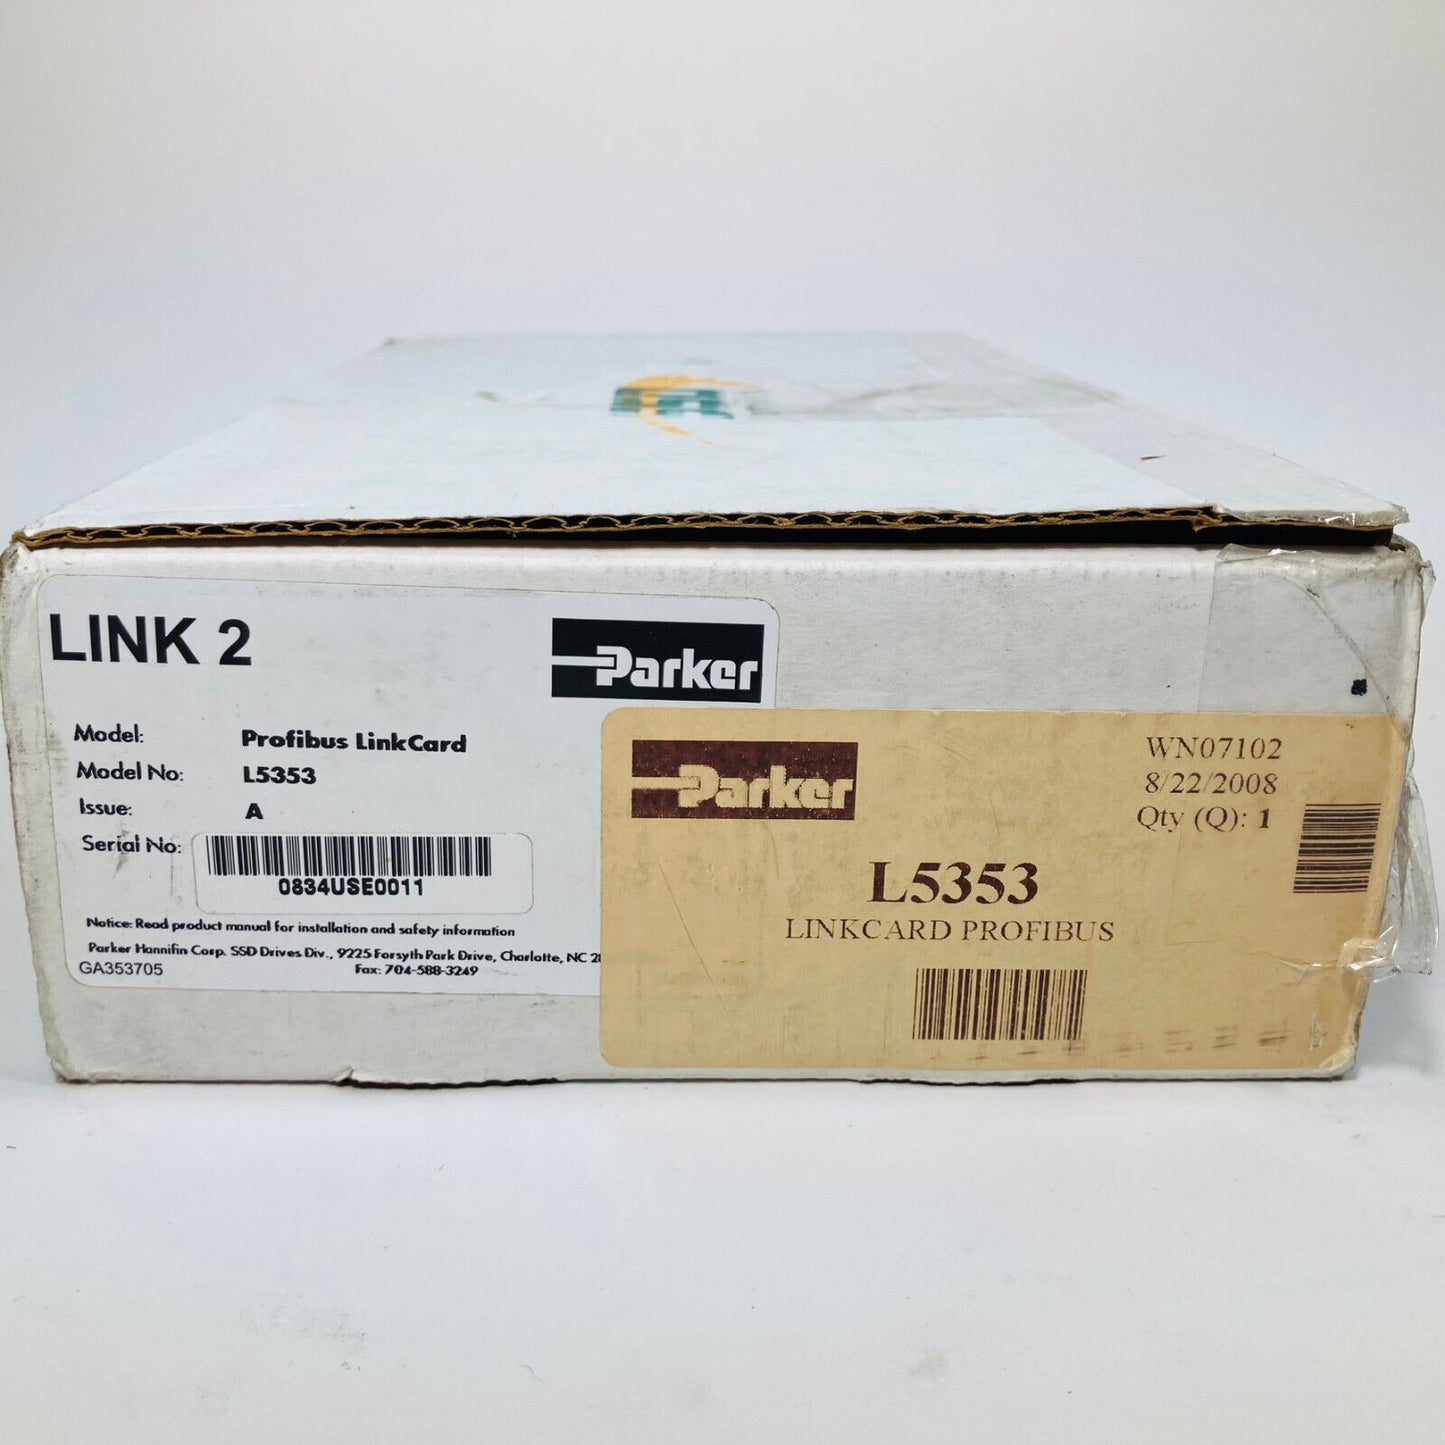 New PARKER EUROTHERM SSD L5353 REV. A LINK 2 LINK2 PROFIBUS LINKCARD